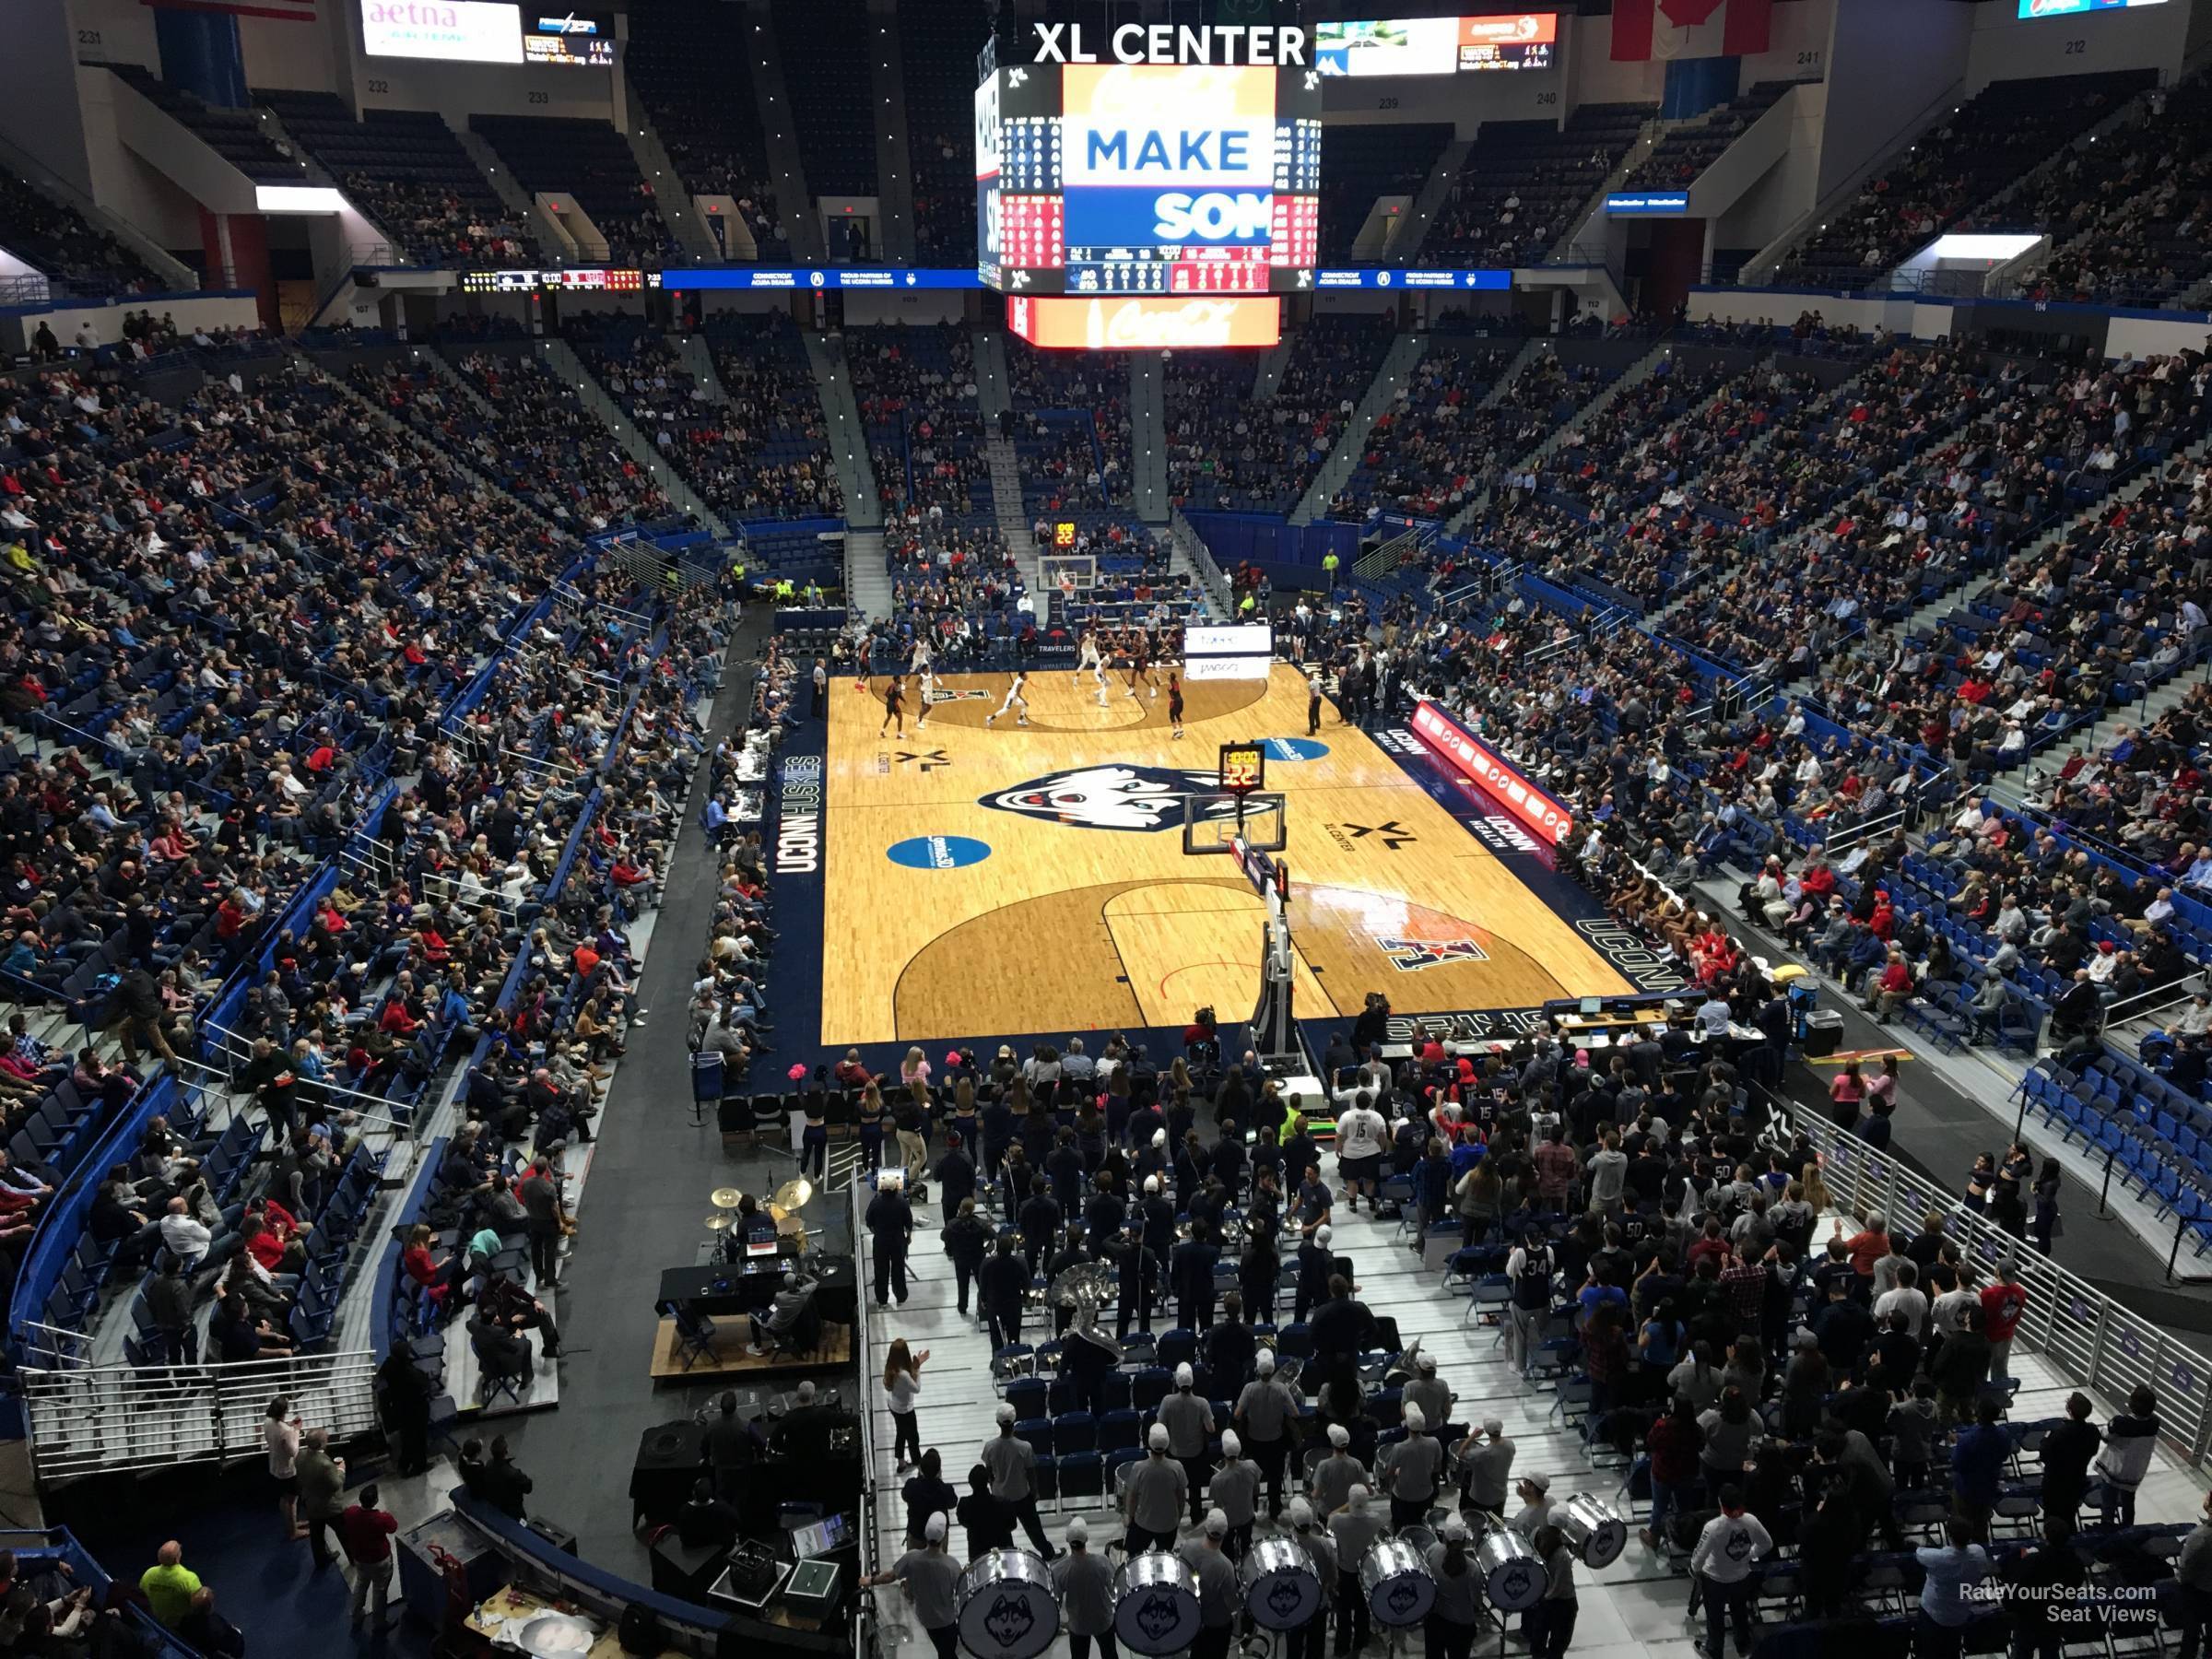 section 226, row a seat view  - xl center